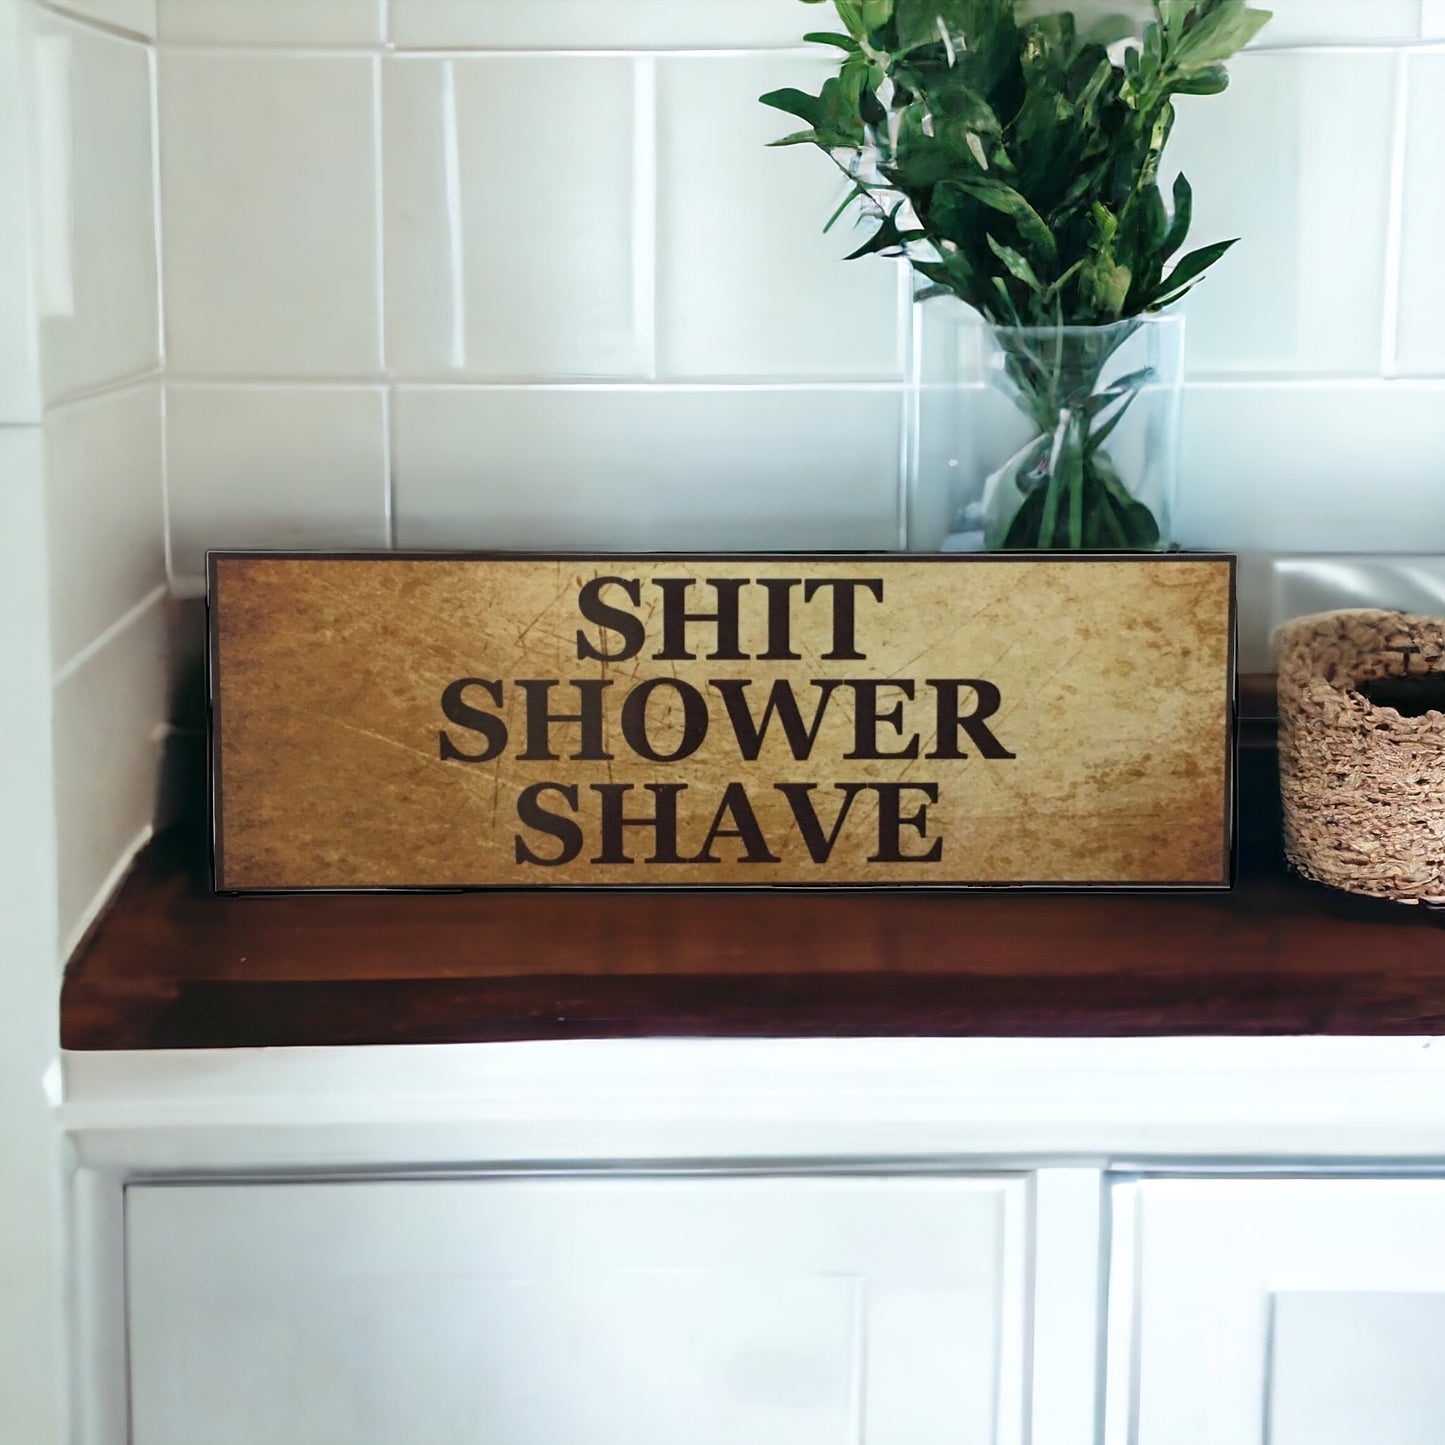 Shit Shower Shave Man Sign - The Renmy Store Homewares & Gifts 